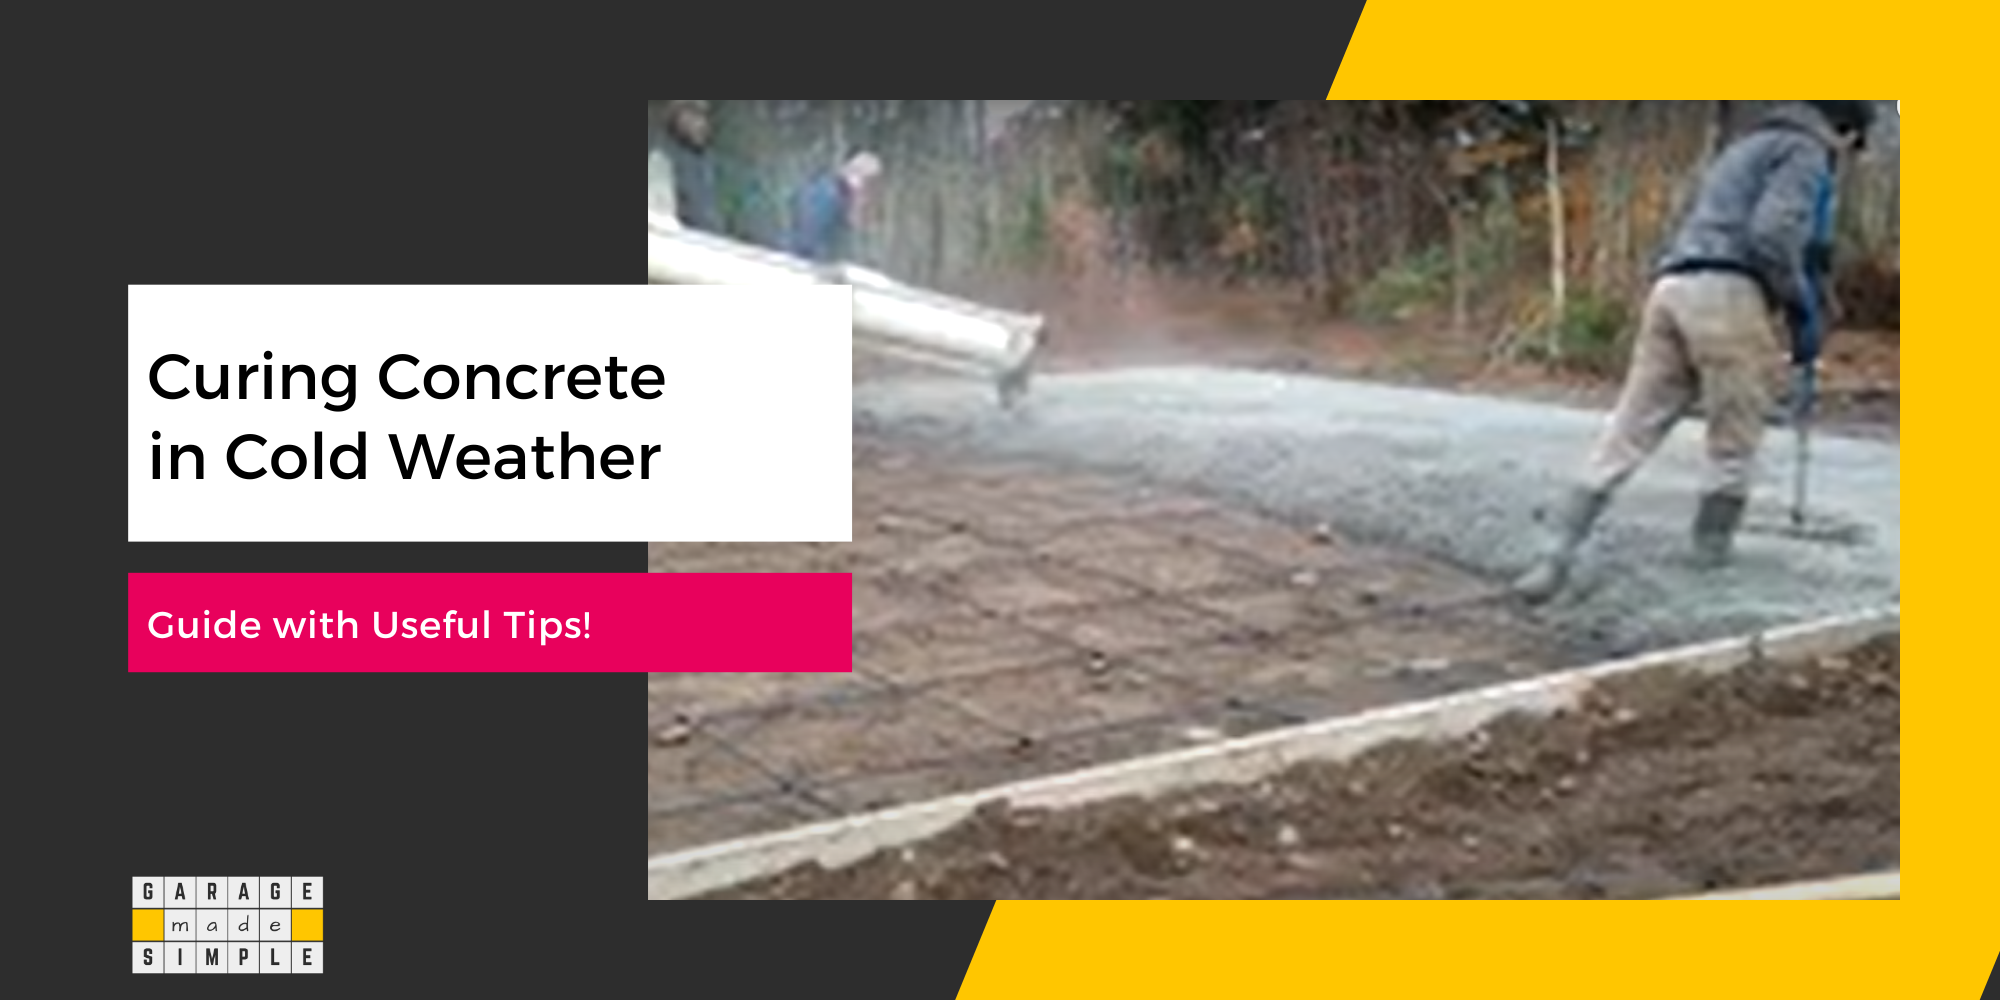 11 Tips for Curing Concrete in Cold Weather: A Useful Guide!